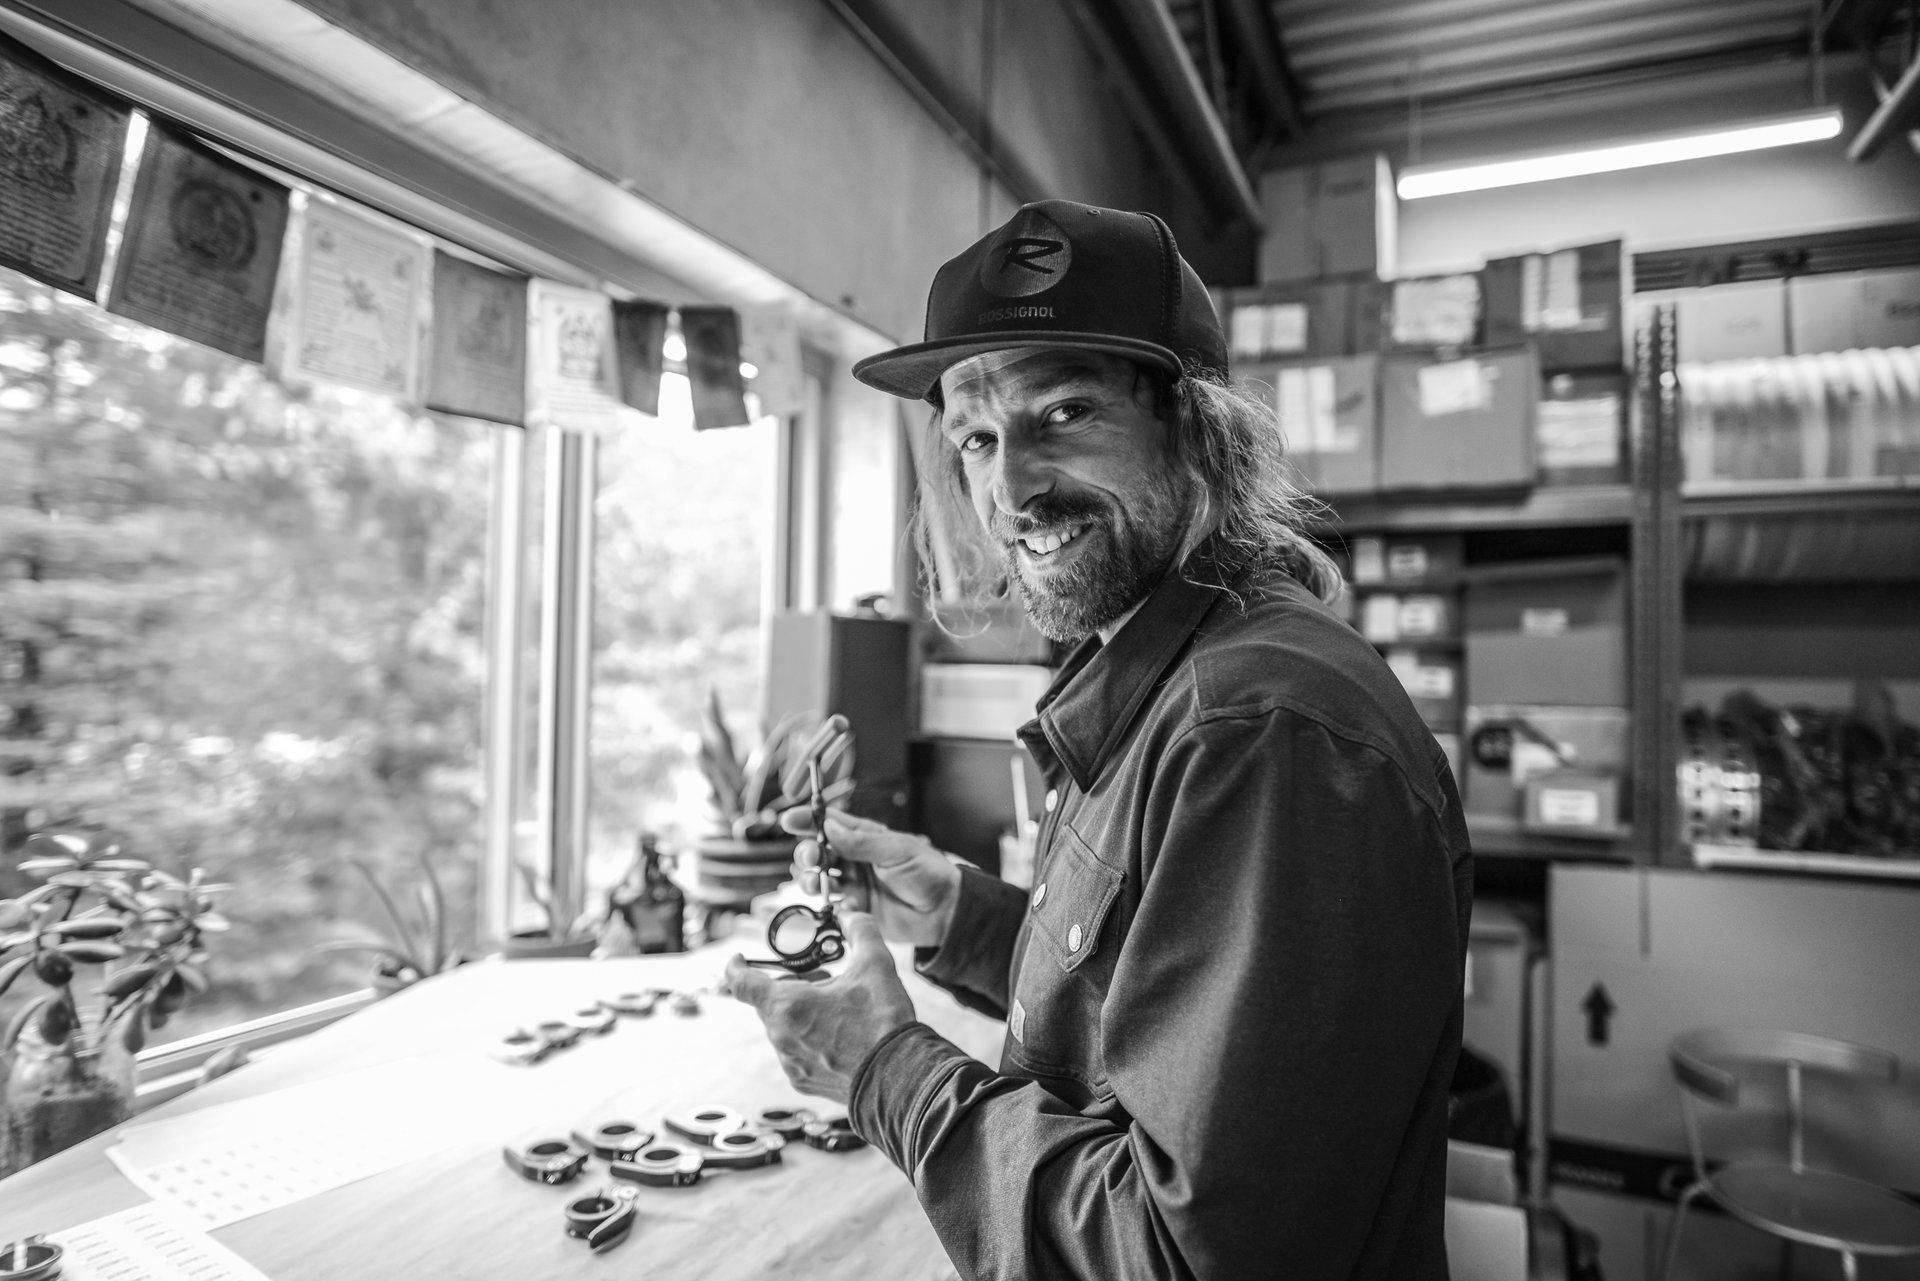 Chromag Staff – Matty Richard works the warehouse and assembly line